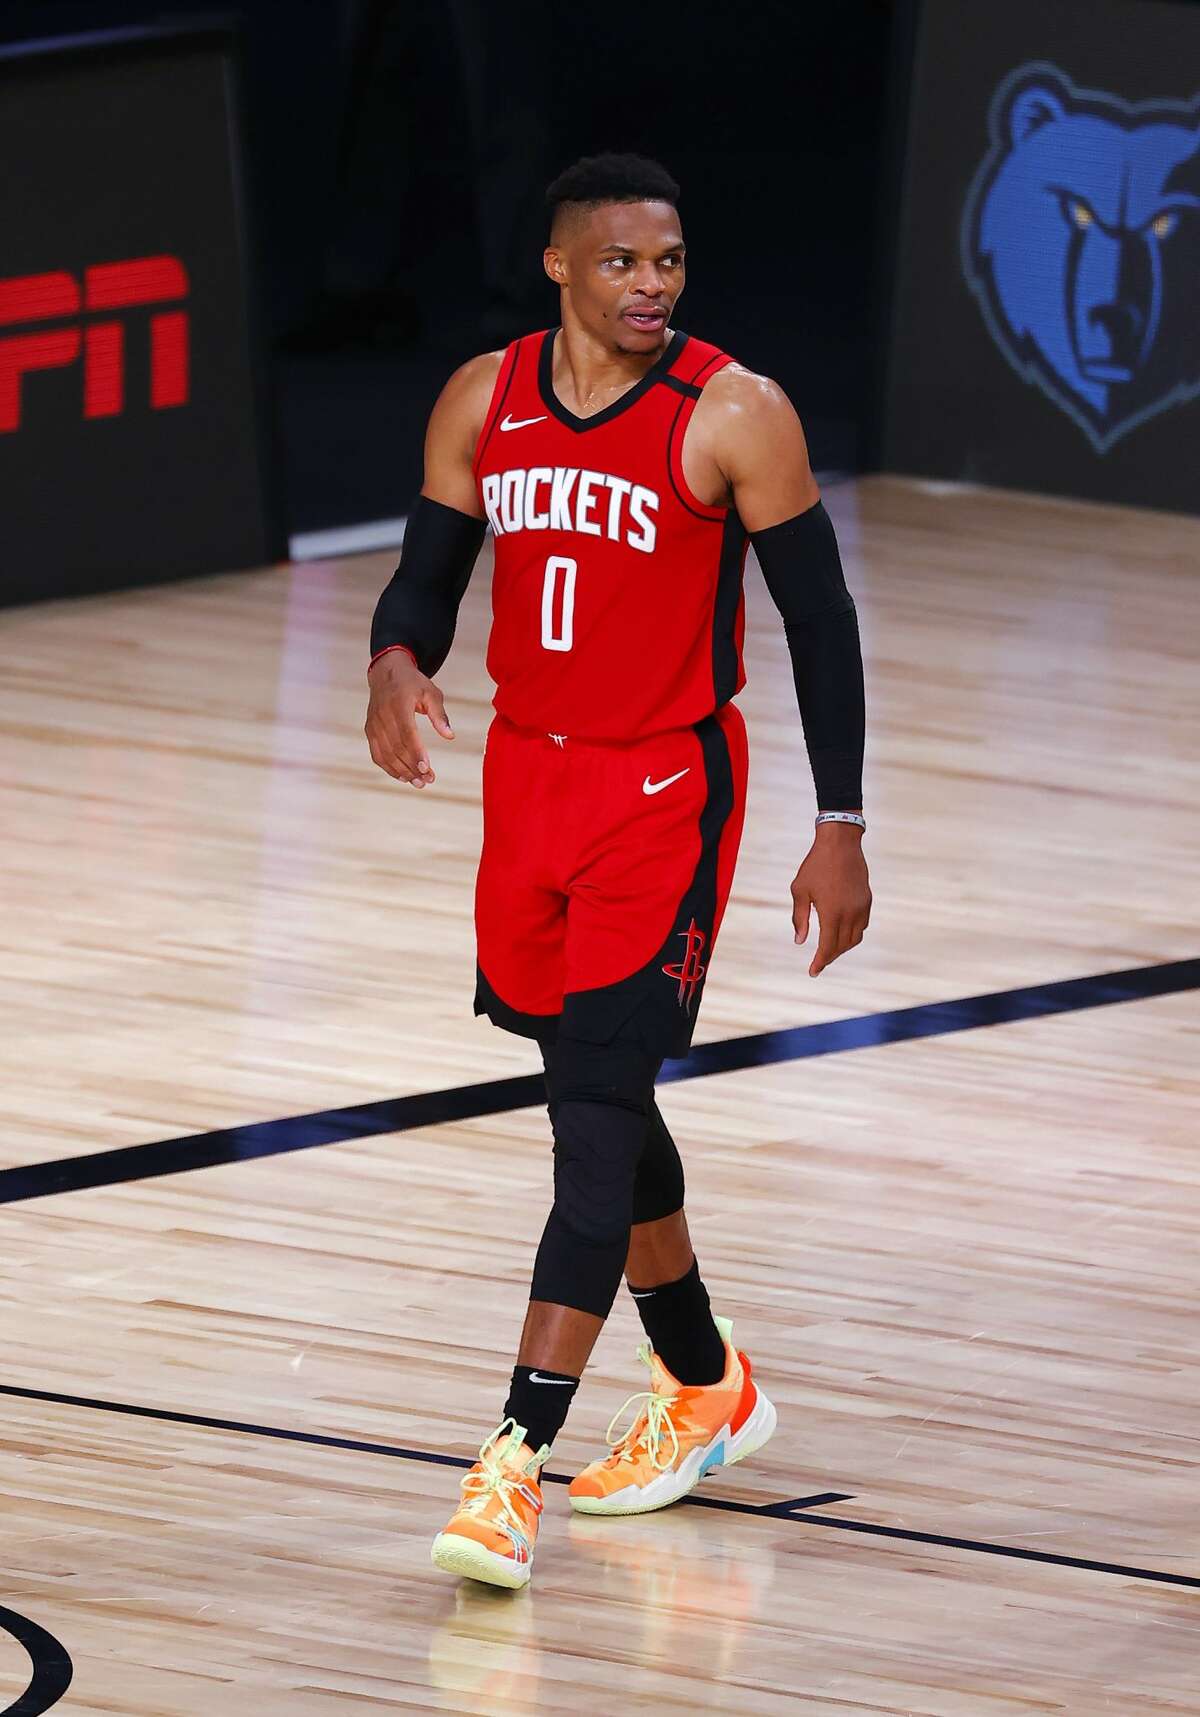 Houston Rockets' Russell Westbrook leaves the court after the team's win over the Milwaukee Bucks in an NBA basketball game Sunday, Aug. 2, 2020, in Lake Buena Vista, Fla. (Mike Ehrmann/Pool Photo via AP)